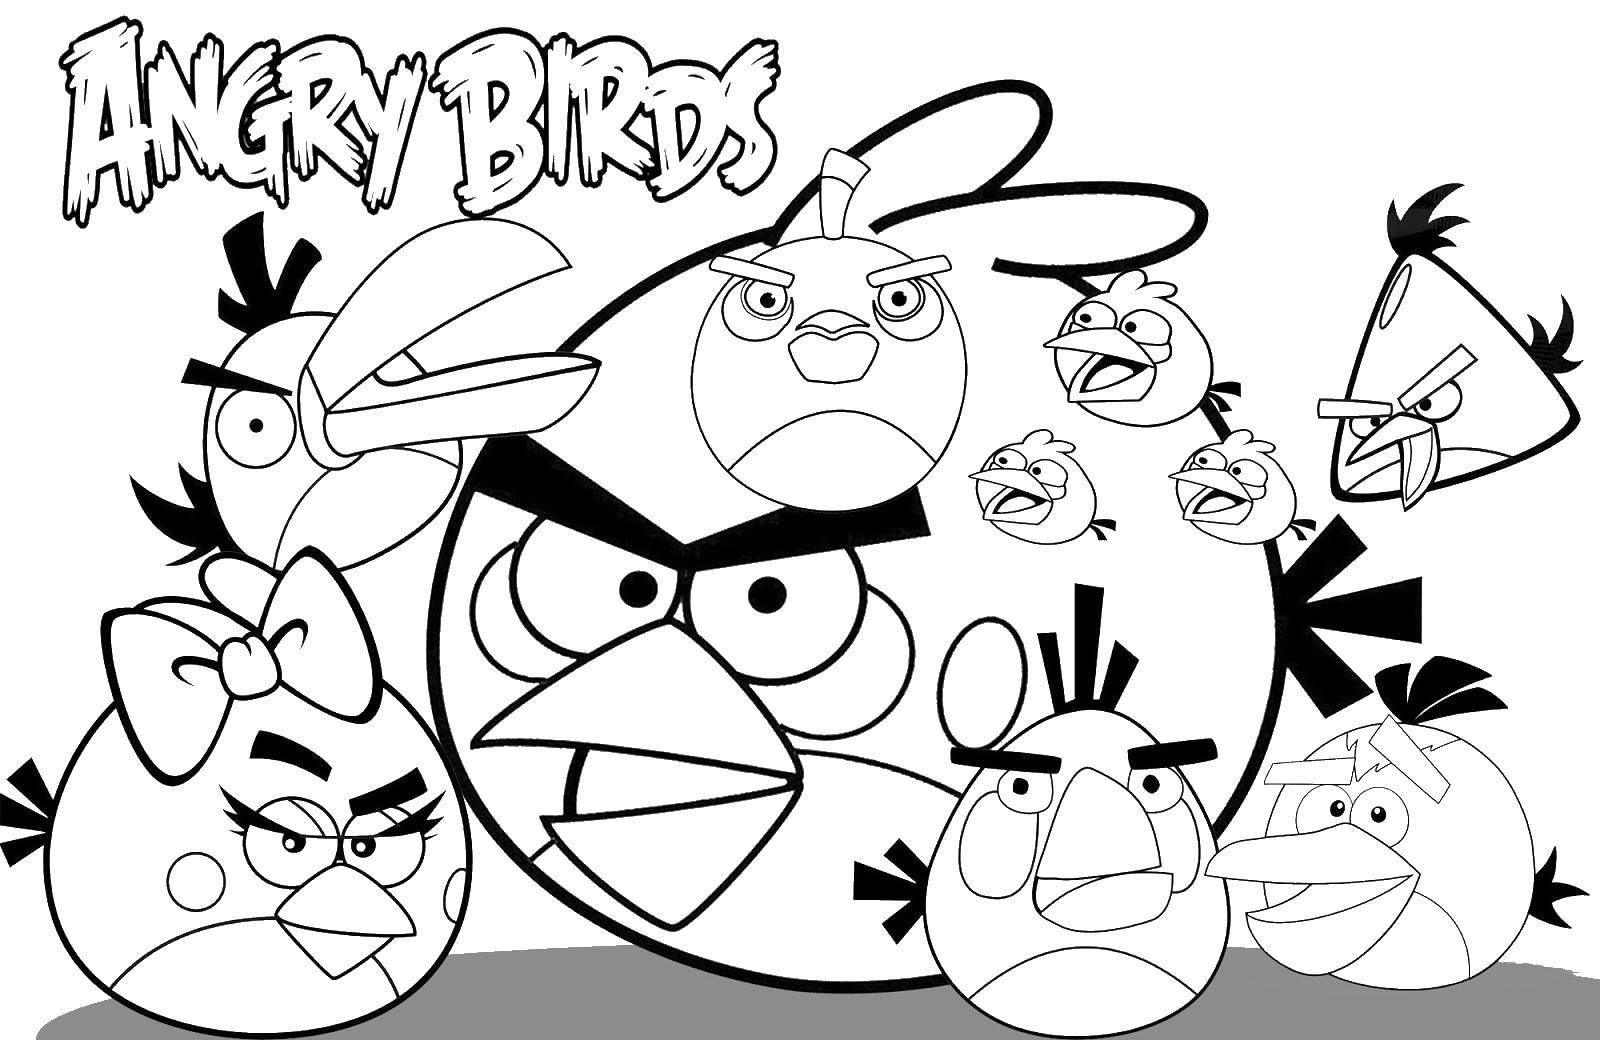 Coloring The birds from angry birds. Category angry birds. Tags:  angry birds, bird.